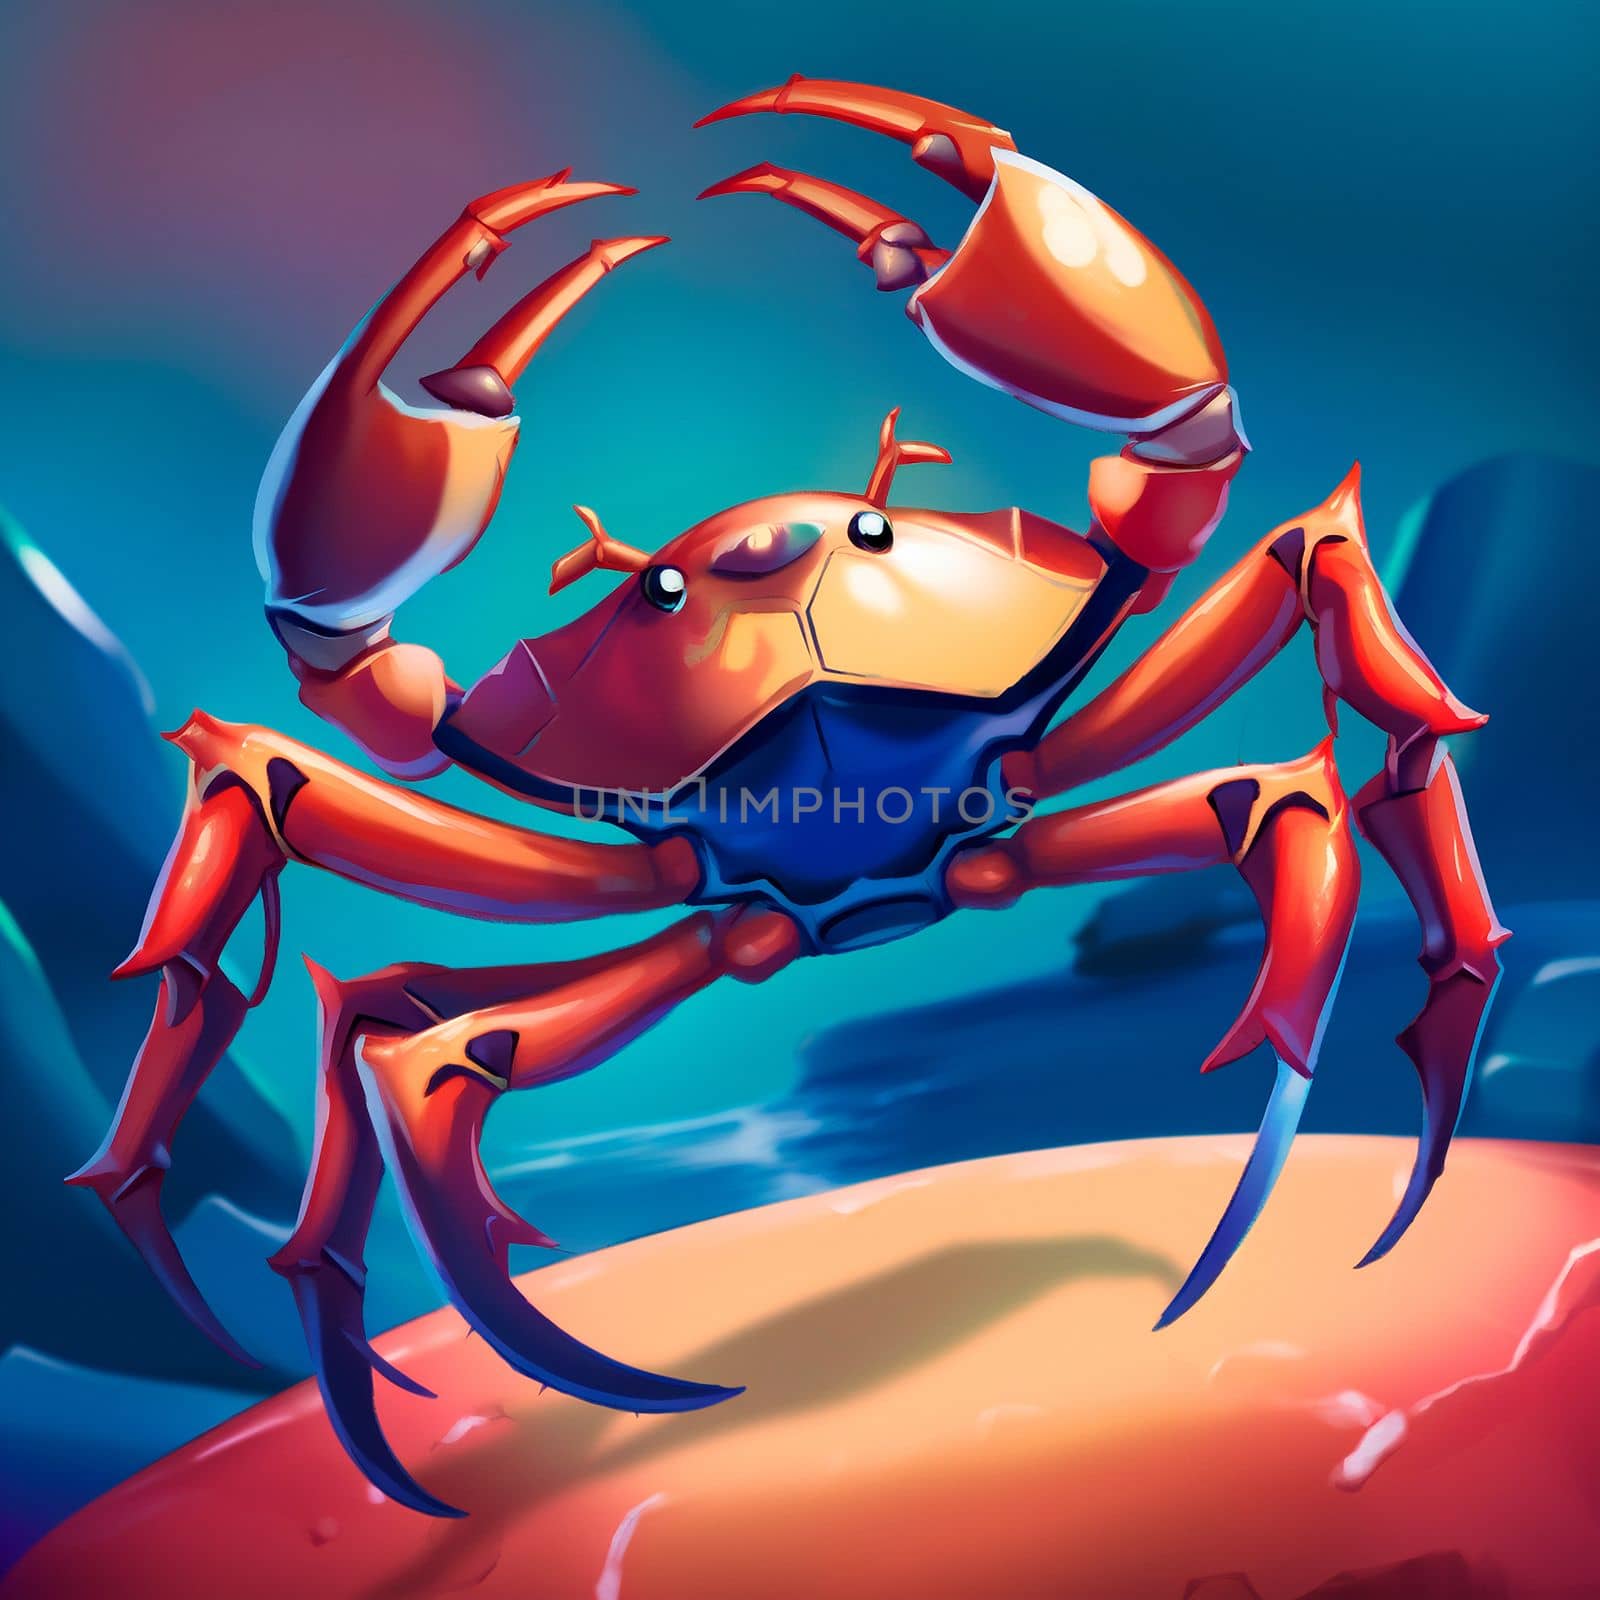 Crab in cartoon style. High quality illustration